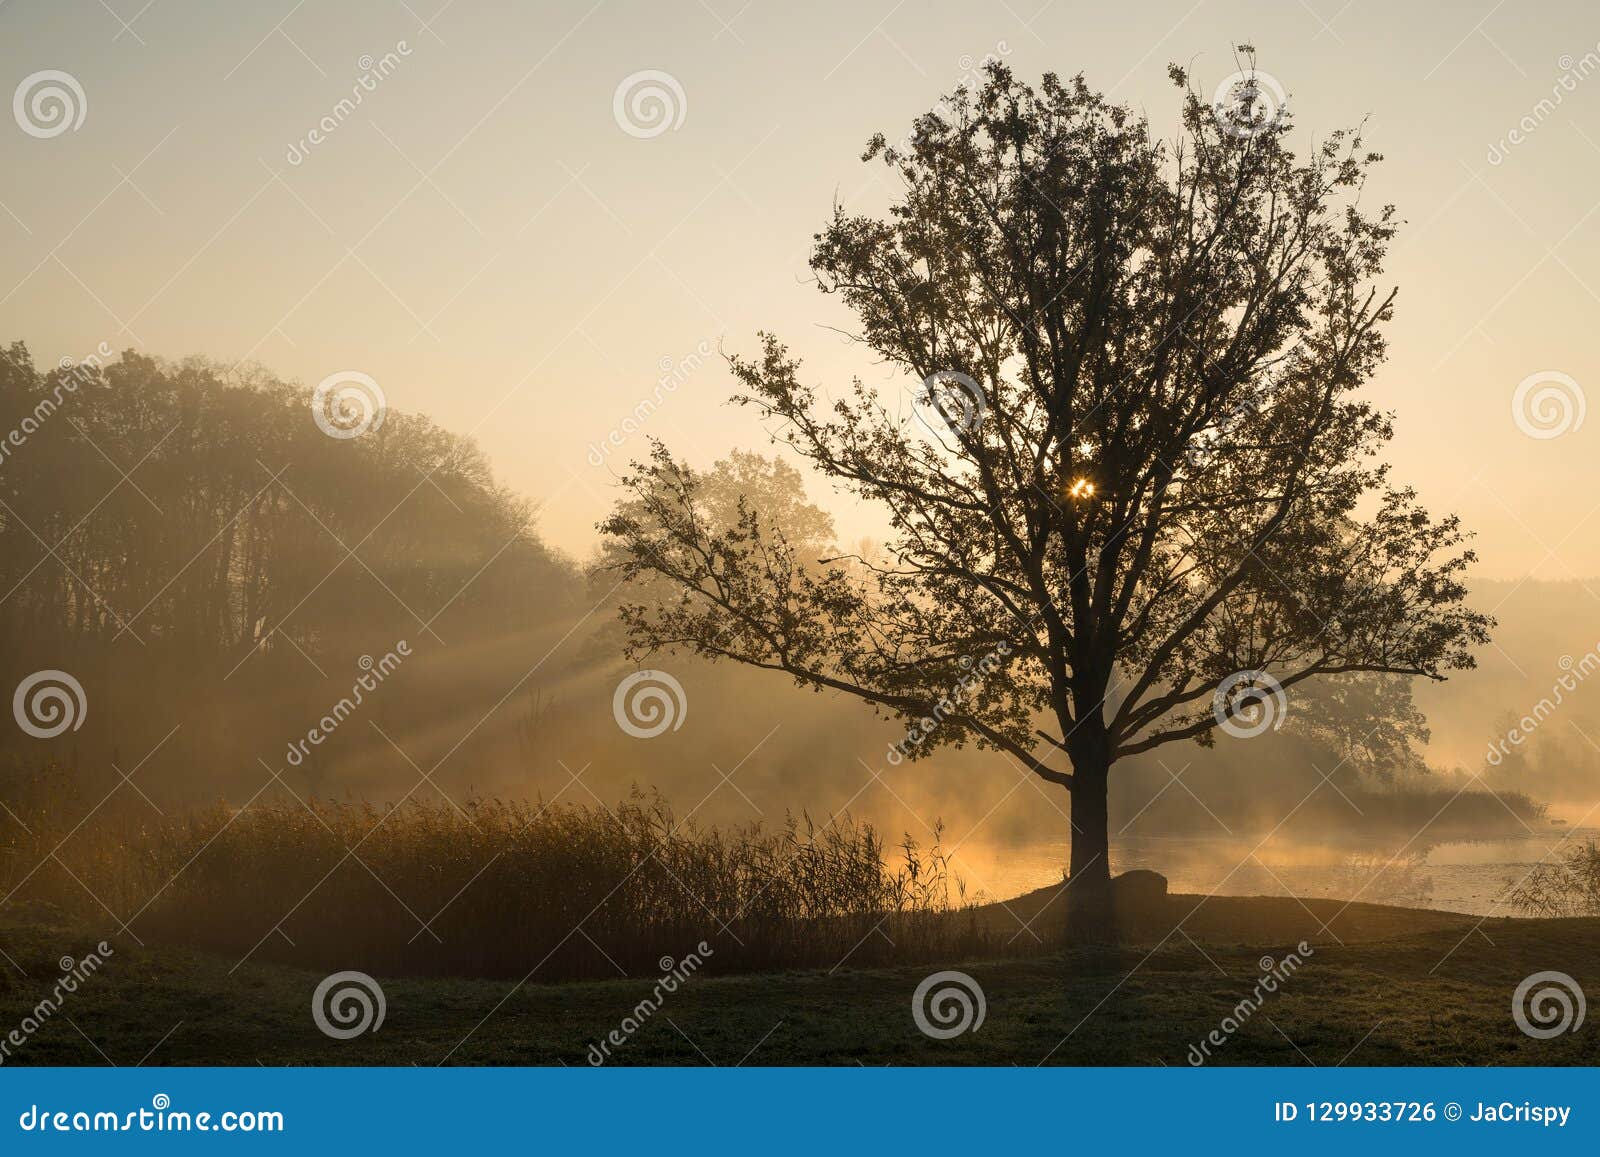 silhouettes of trees on a misty foggy morning with sun rays coming through the tree branches on the lake shore in europe.